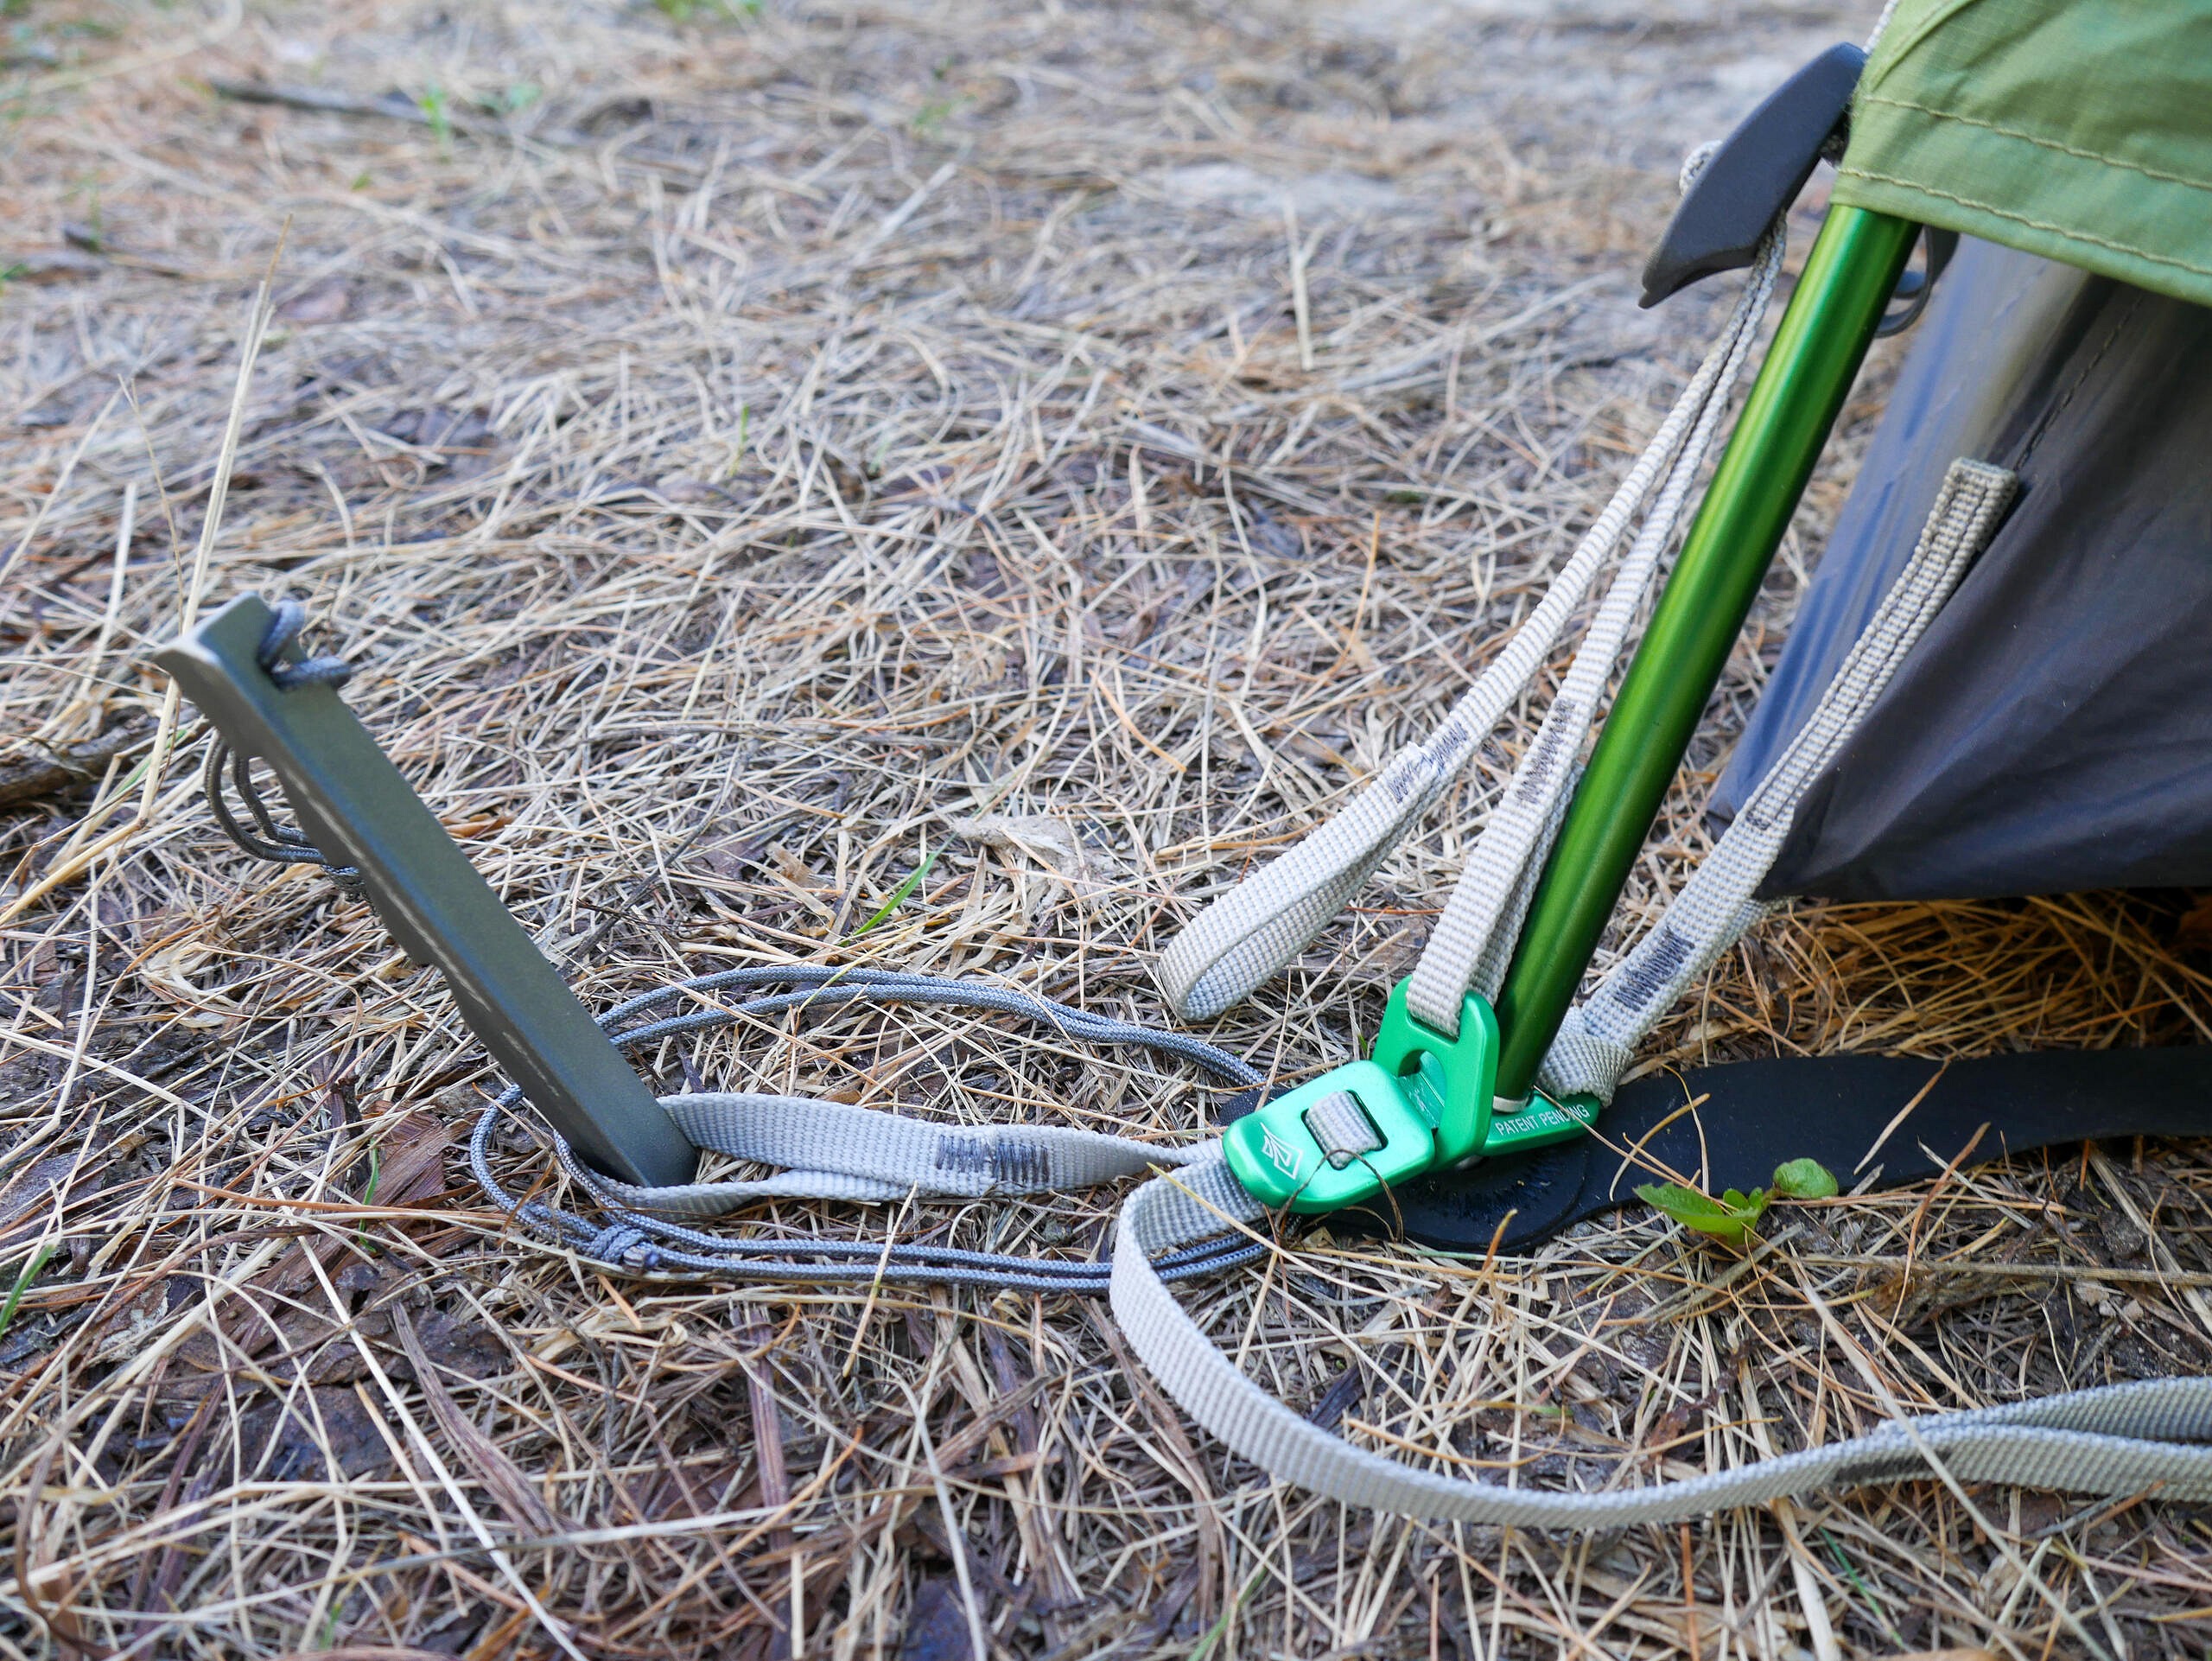 High quality and robust materials used in pegs and hardware  © UKC Gear